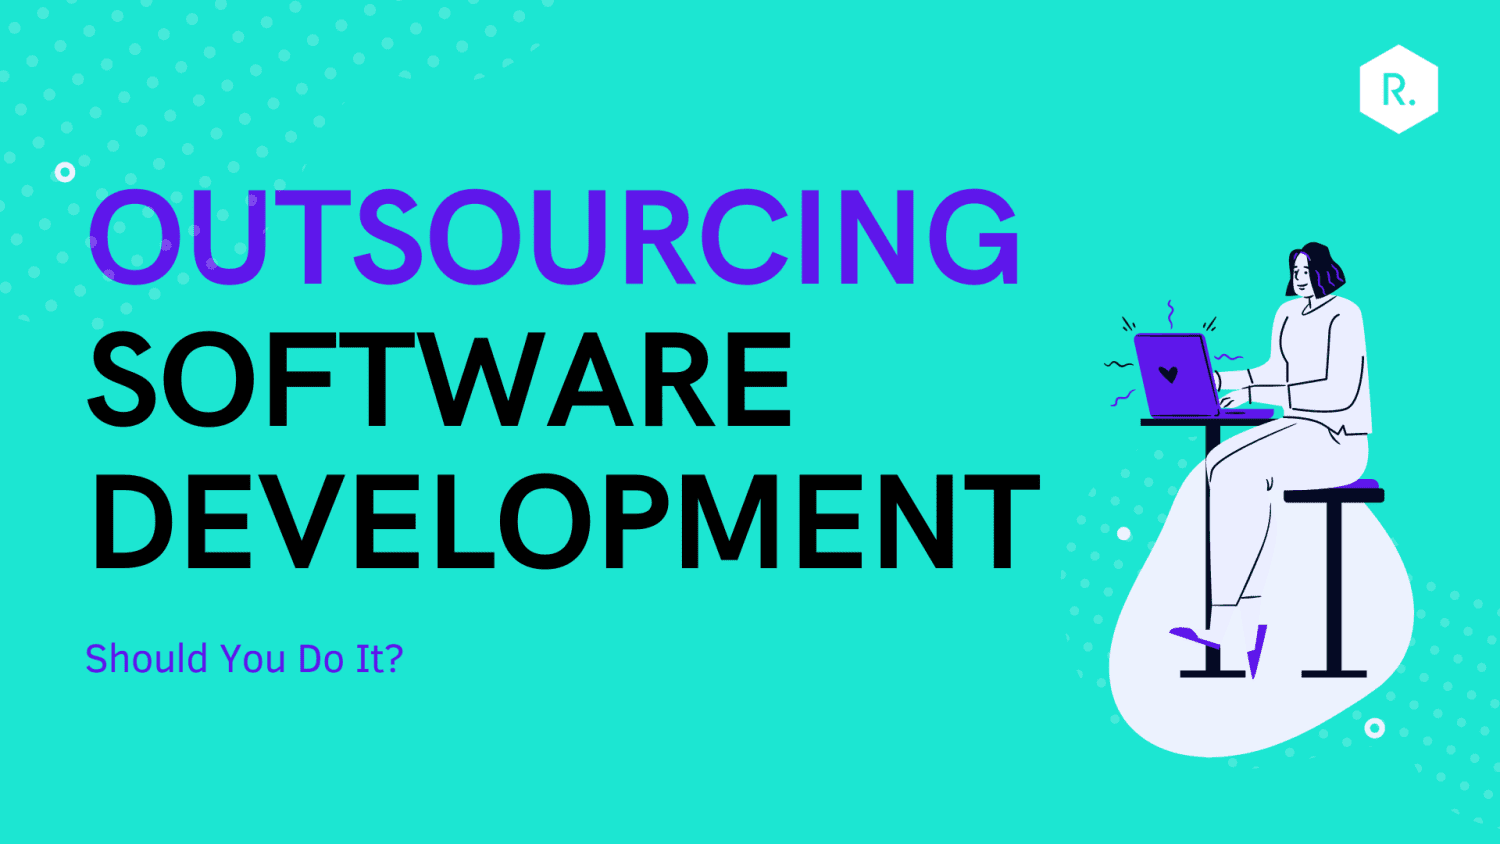 Outsourcing Software Development in Finland: Should You Do It? - 2021 Update